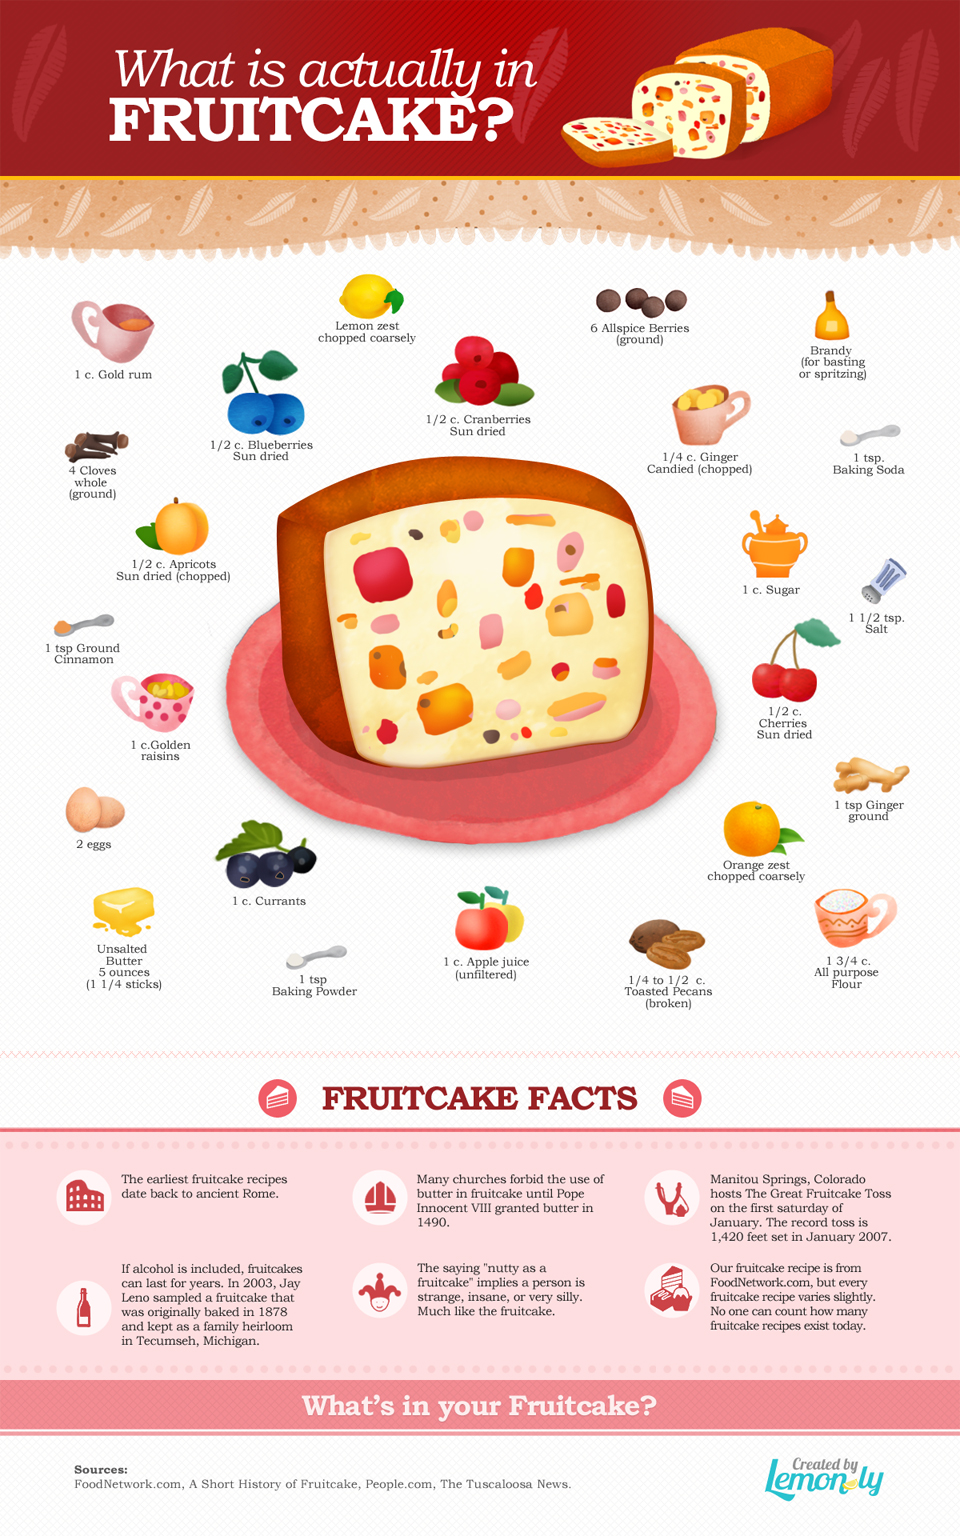 What Is Actually In Fruitcake?